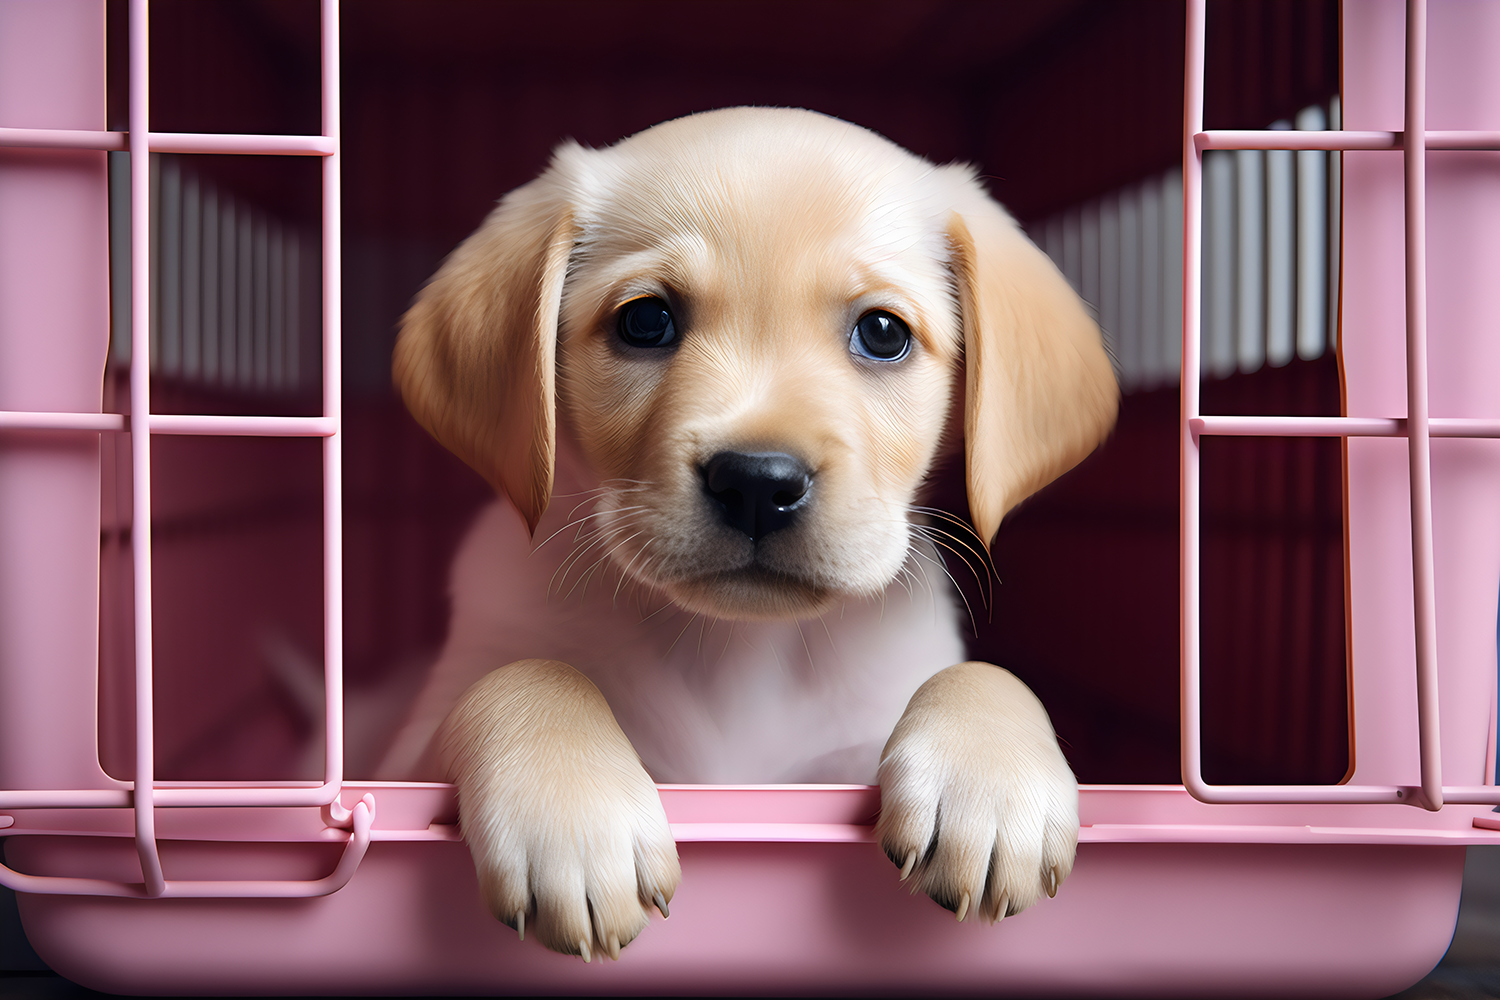 Crate Training Doesn't Need To Be Stressful! 